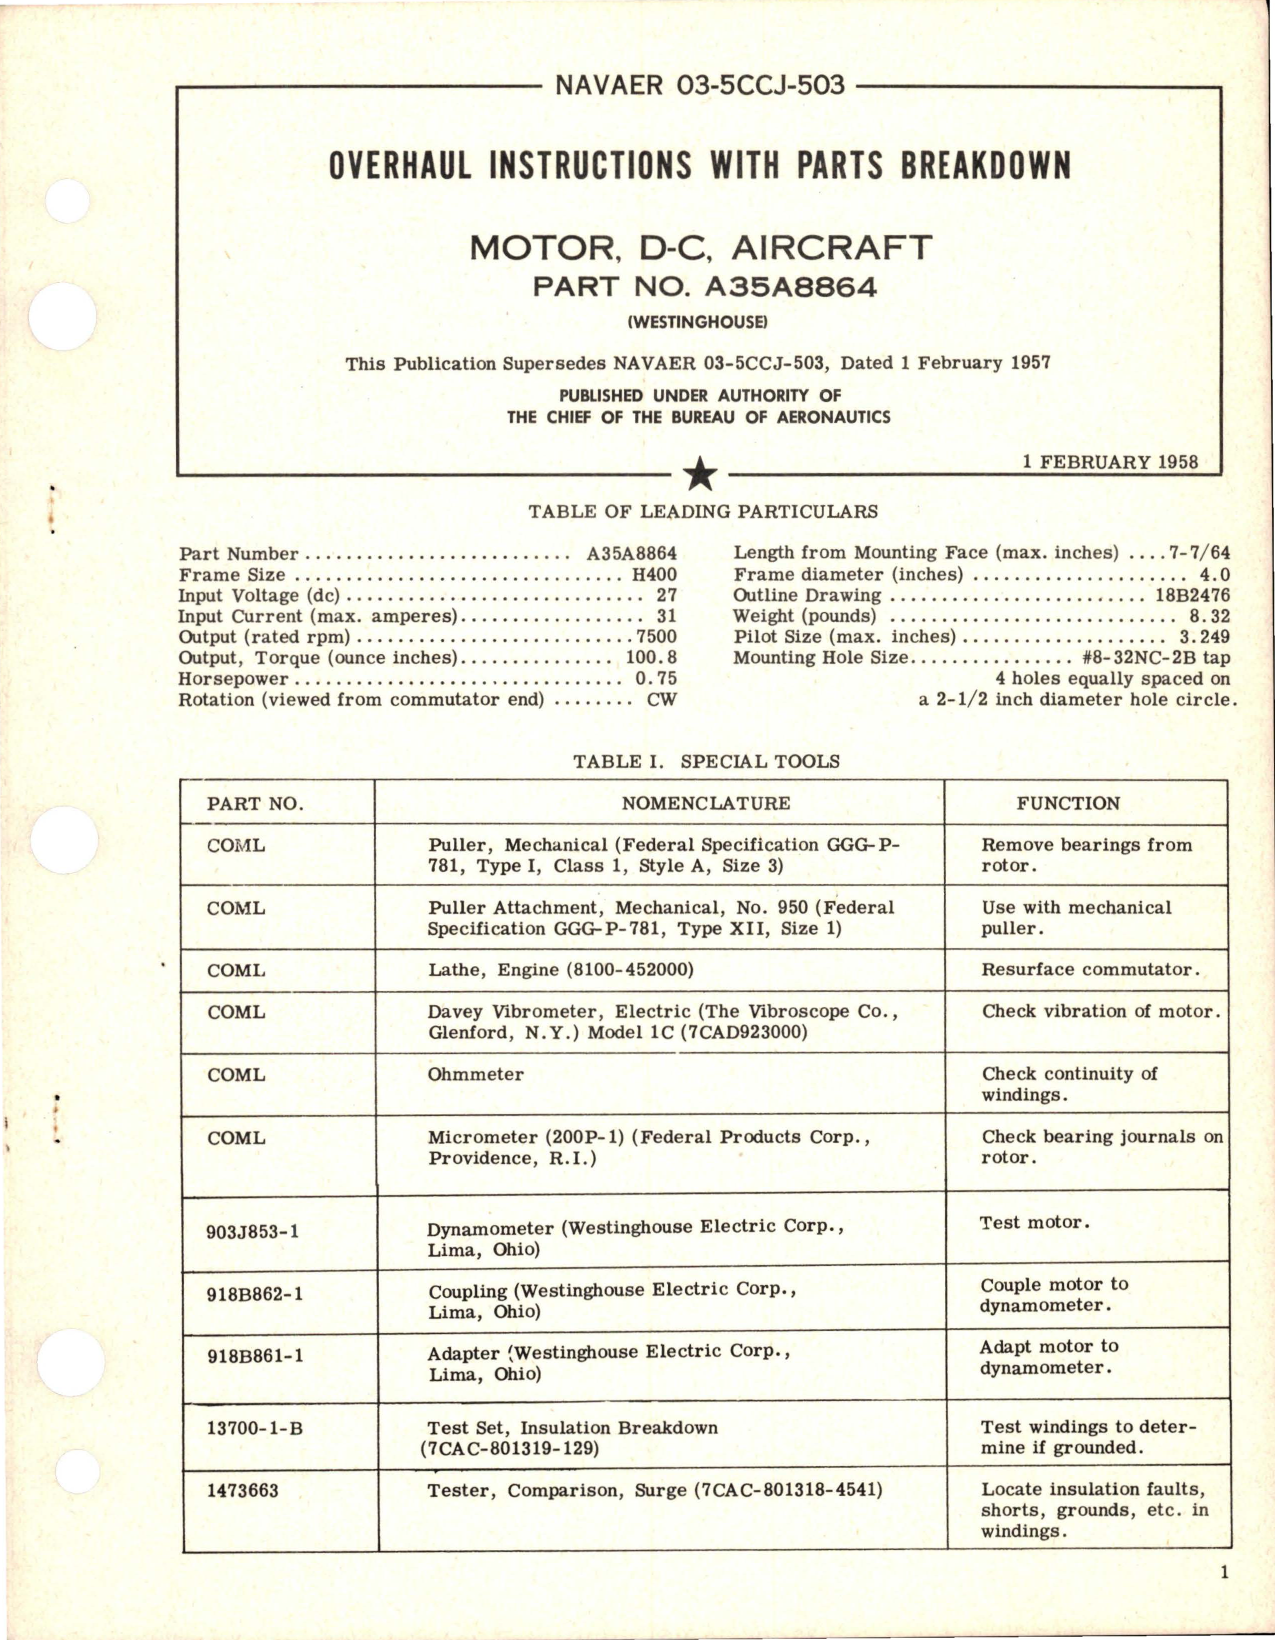 Sample page 1 from AirCorps Library document: Overhaul Instructions with Parts Breakdown for DC Motor - Part A35A8864